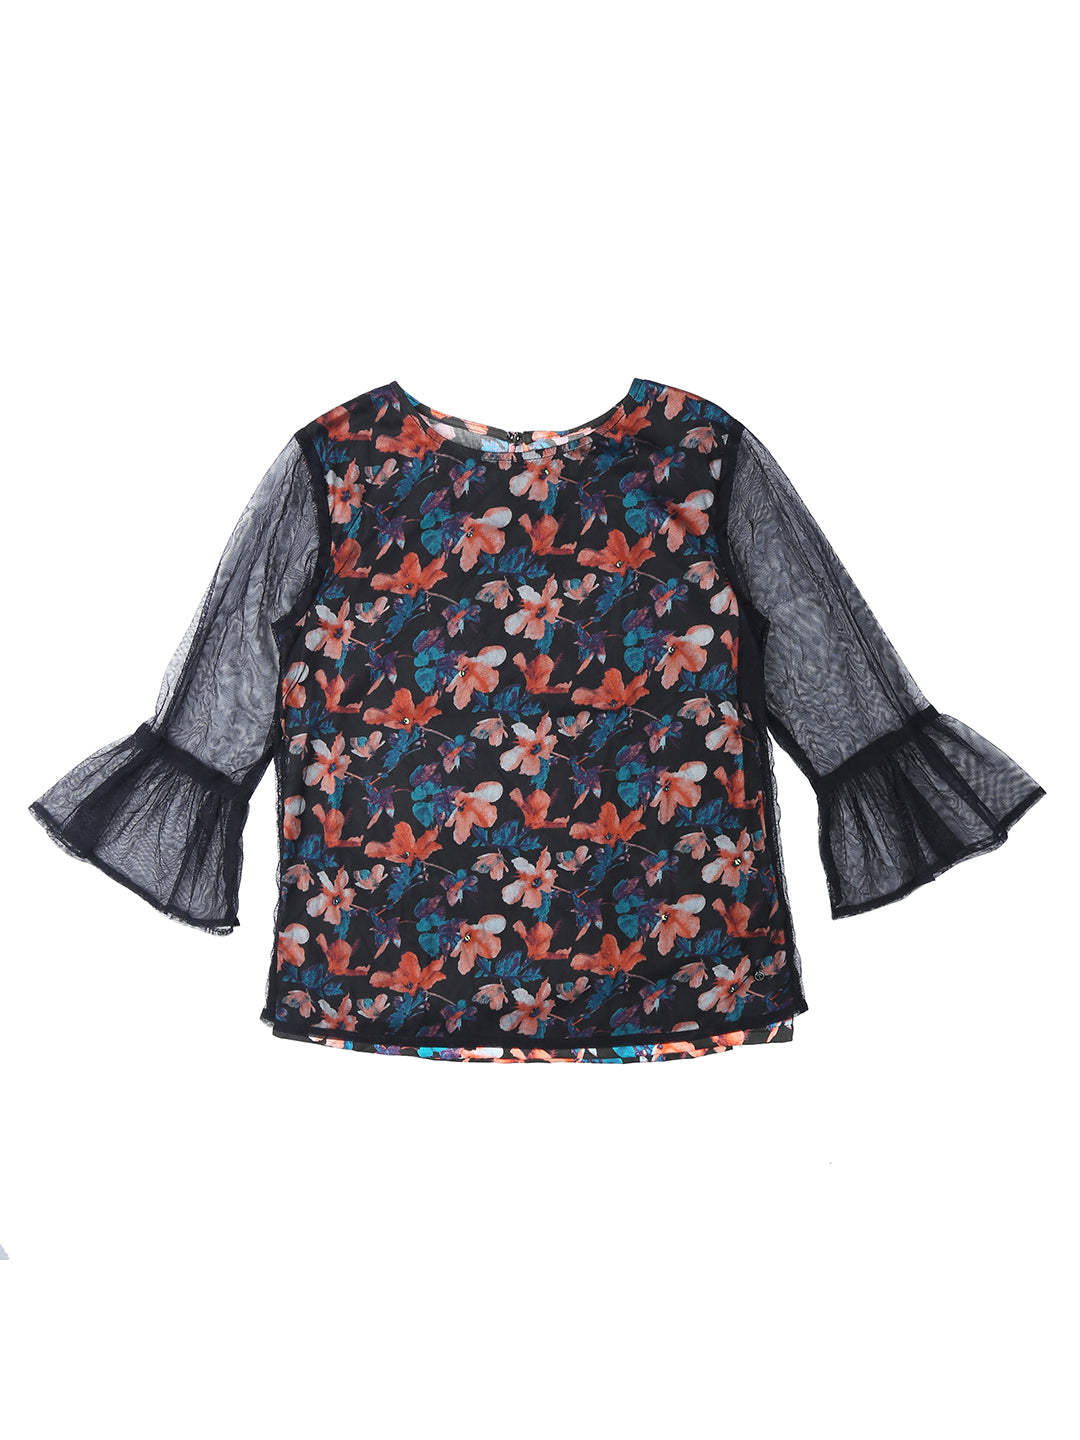 Girls Black Woven Floral Print Half Sleeves Woven Top